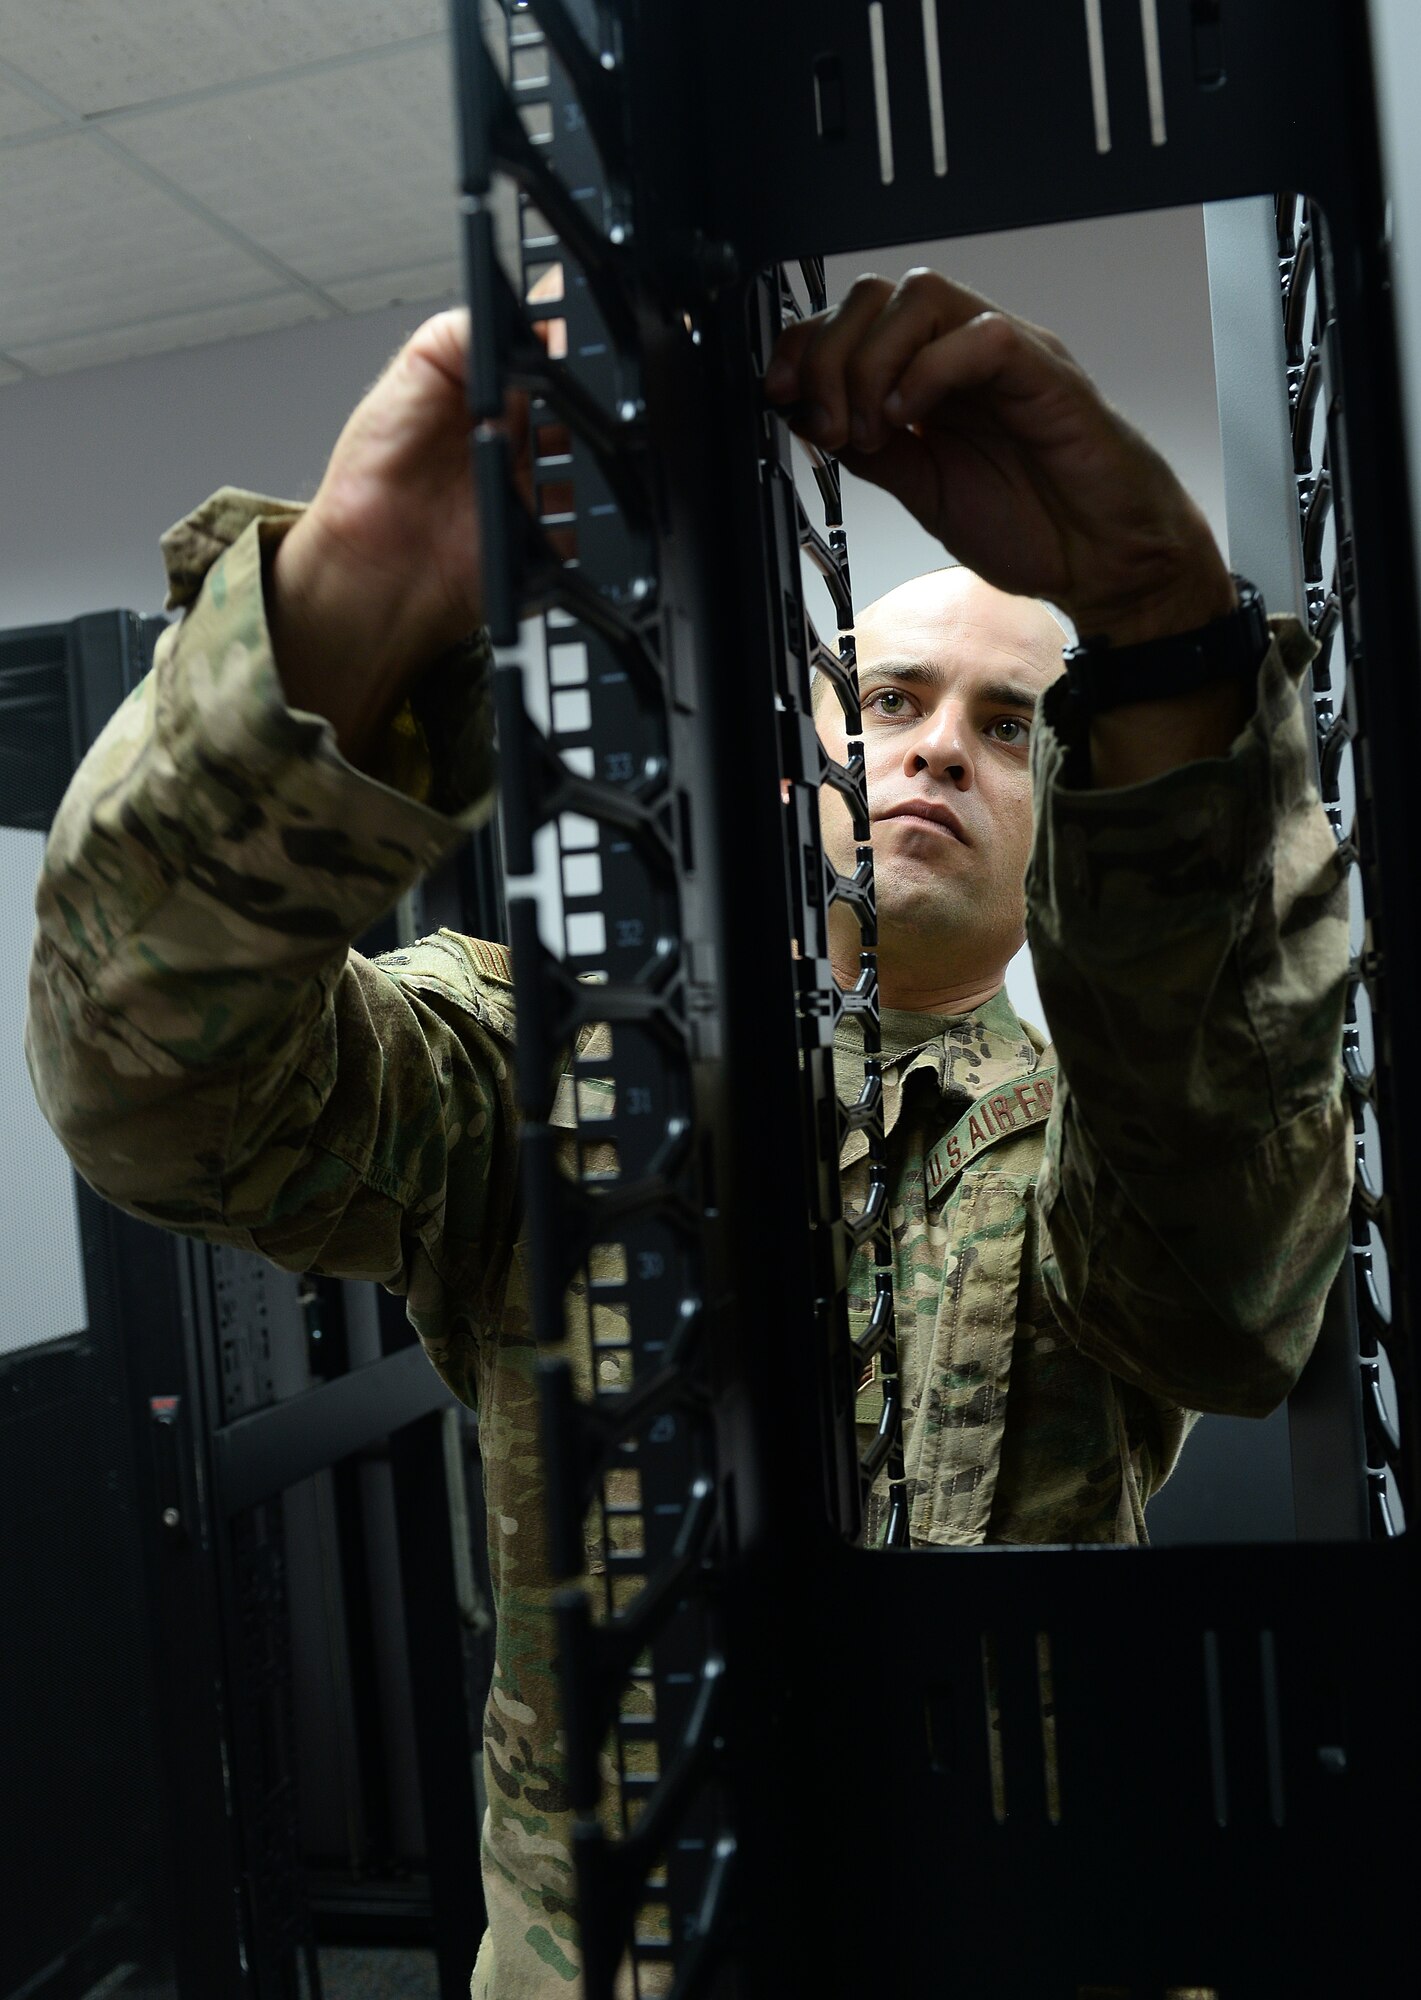 Tech. Sgt. Nick Doage, 217th Engineering and Installation Squadron quality assurance, assembles a hard drive rack July 10, 2019, inside the Martin Bomber building at Offutt Air Force Base, Nebraska.Air National Guard members from the 217th and 210th Engineering Installation Squadrons out of Illinois and Minnesota traveled here to aid the 55th Communications Squadron in laying new fiber-cabling for the 97th Intelligence Support Squadron and other various squadrons.